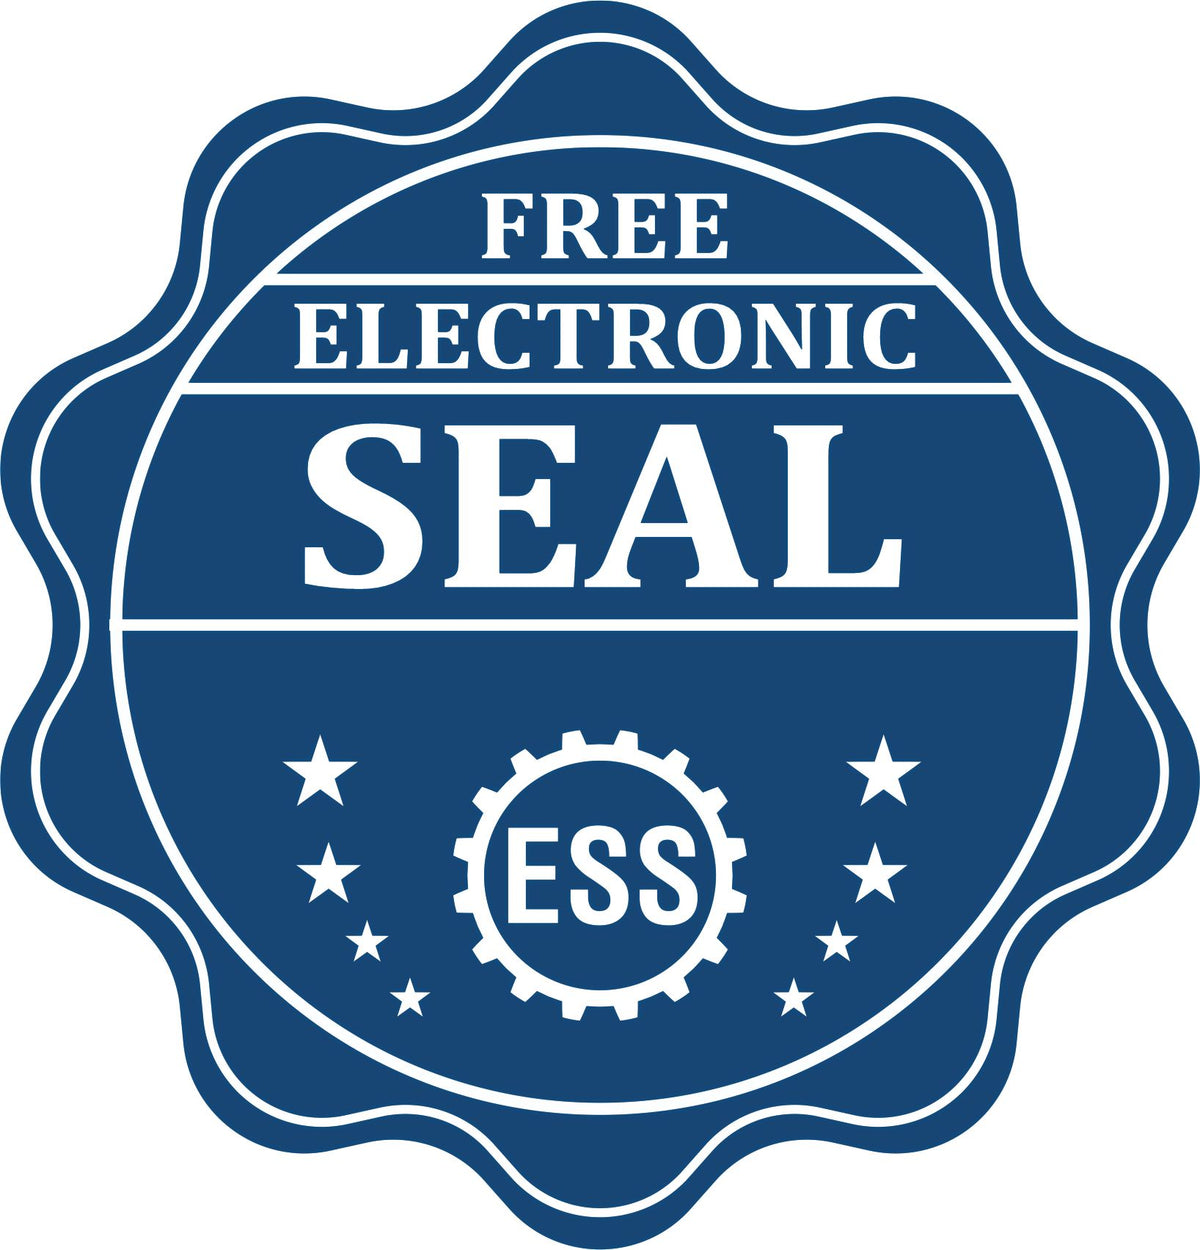 A badge showing a free electronic seal for the PSI Ohio Notary Stamp with stars and the ESS gear on the emblem.